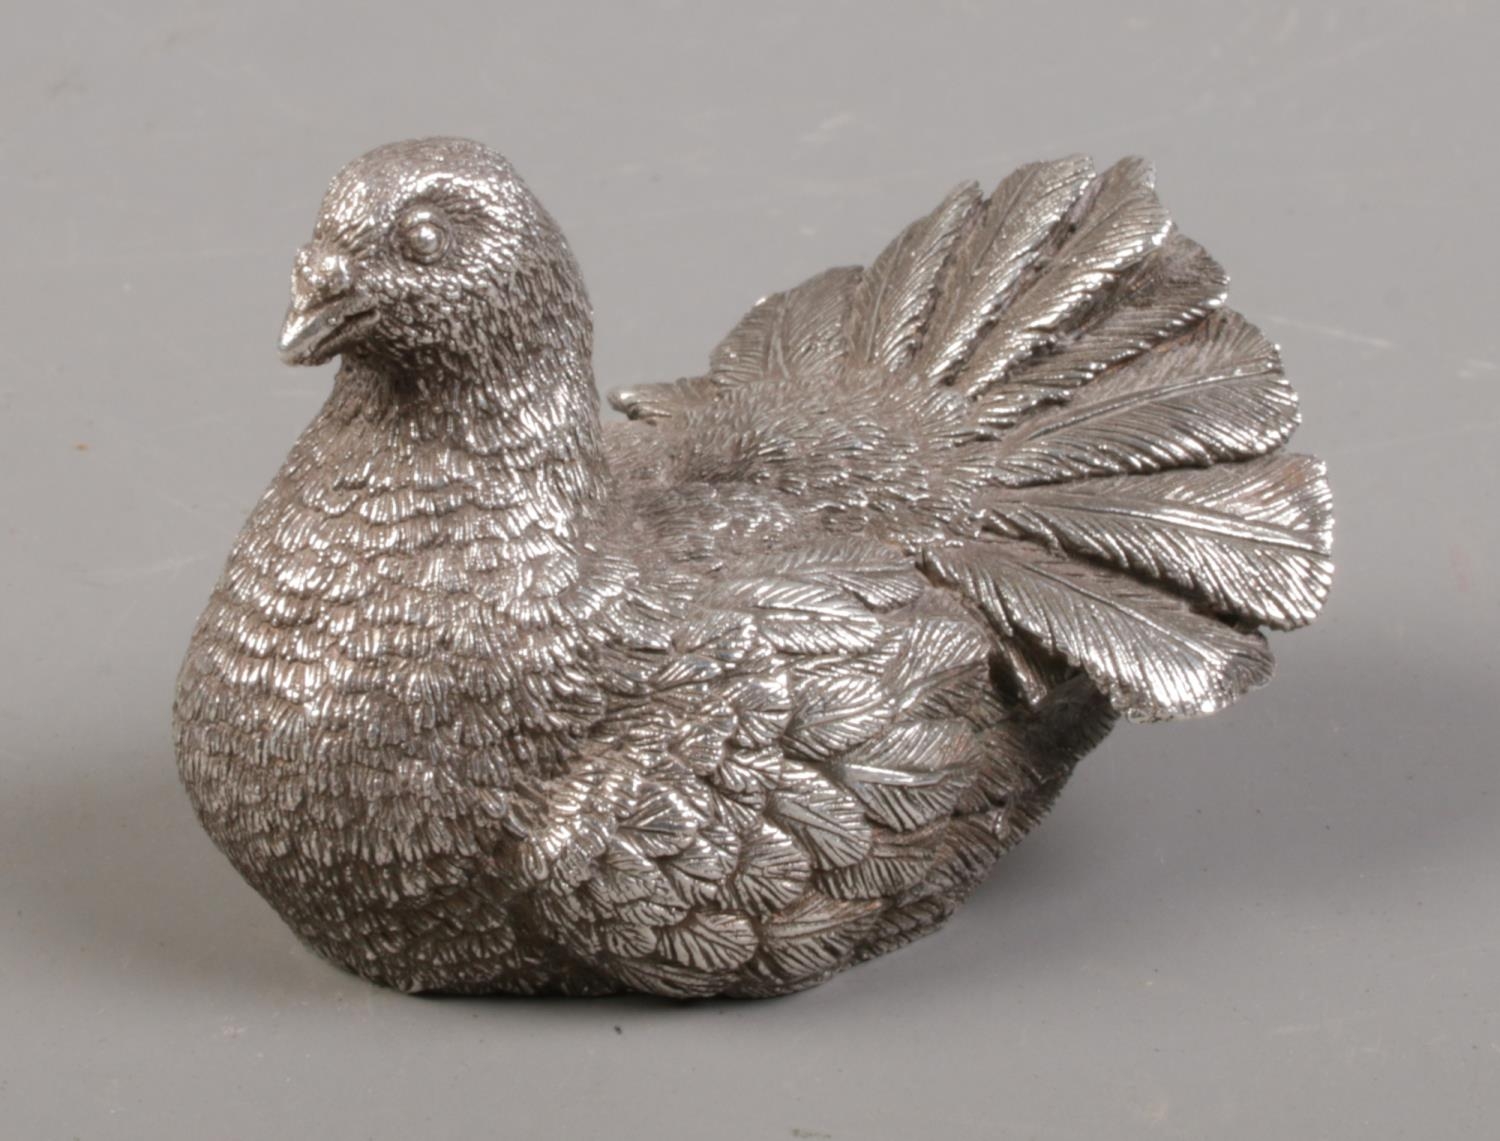 A silver covered model of a turtle dove. Import marks for London. 49g.